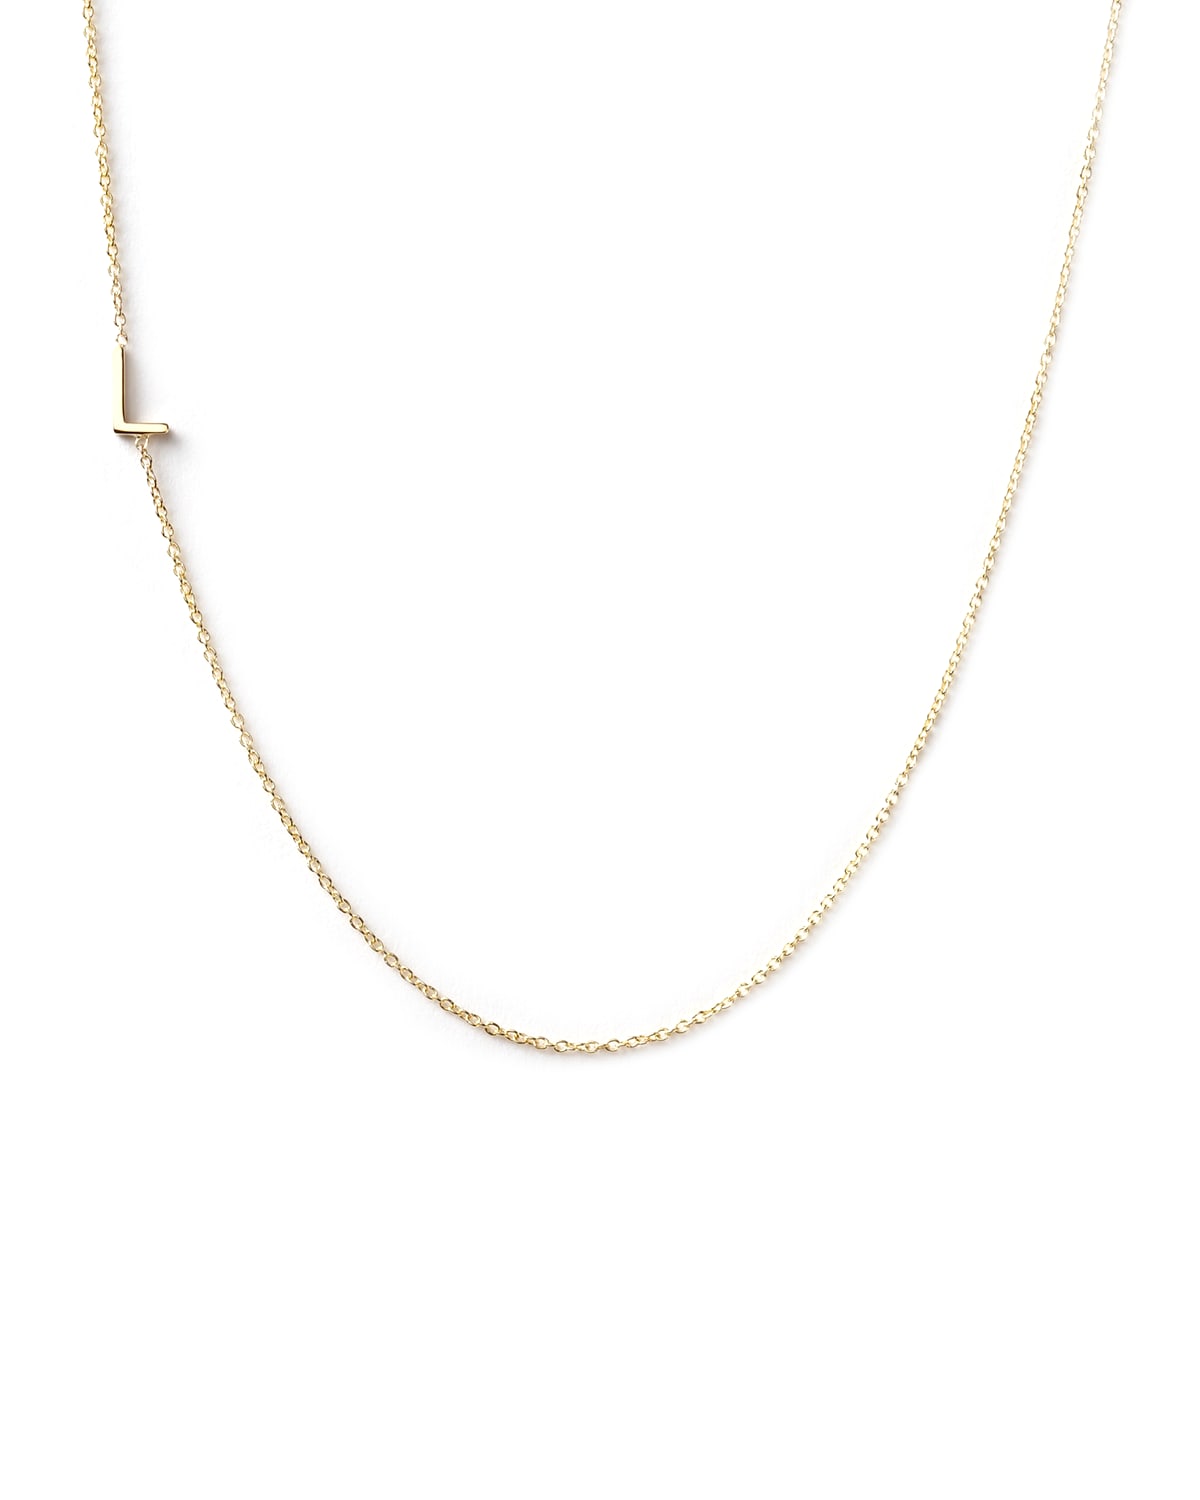 Maya Brenner Designs 14k Yellow Gold Mini Letter Necklace